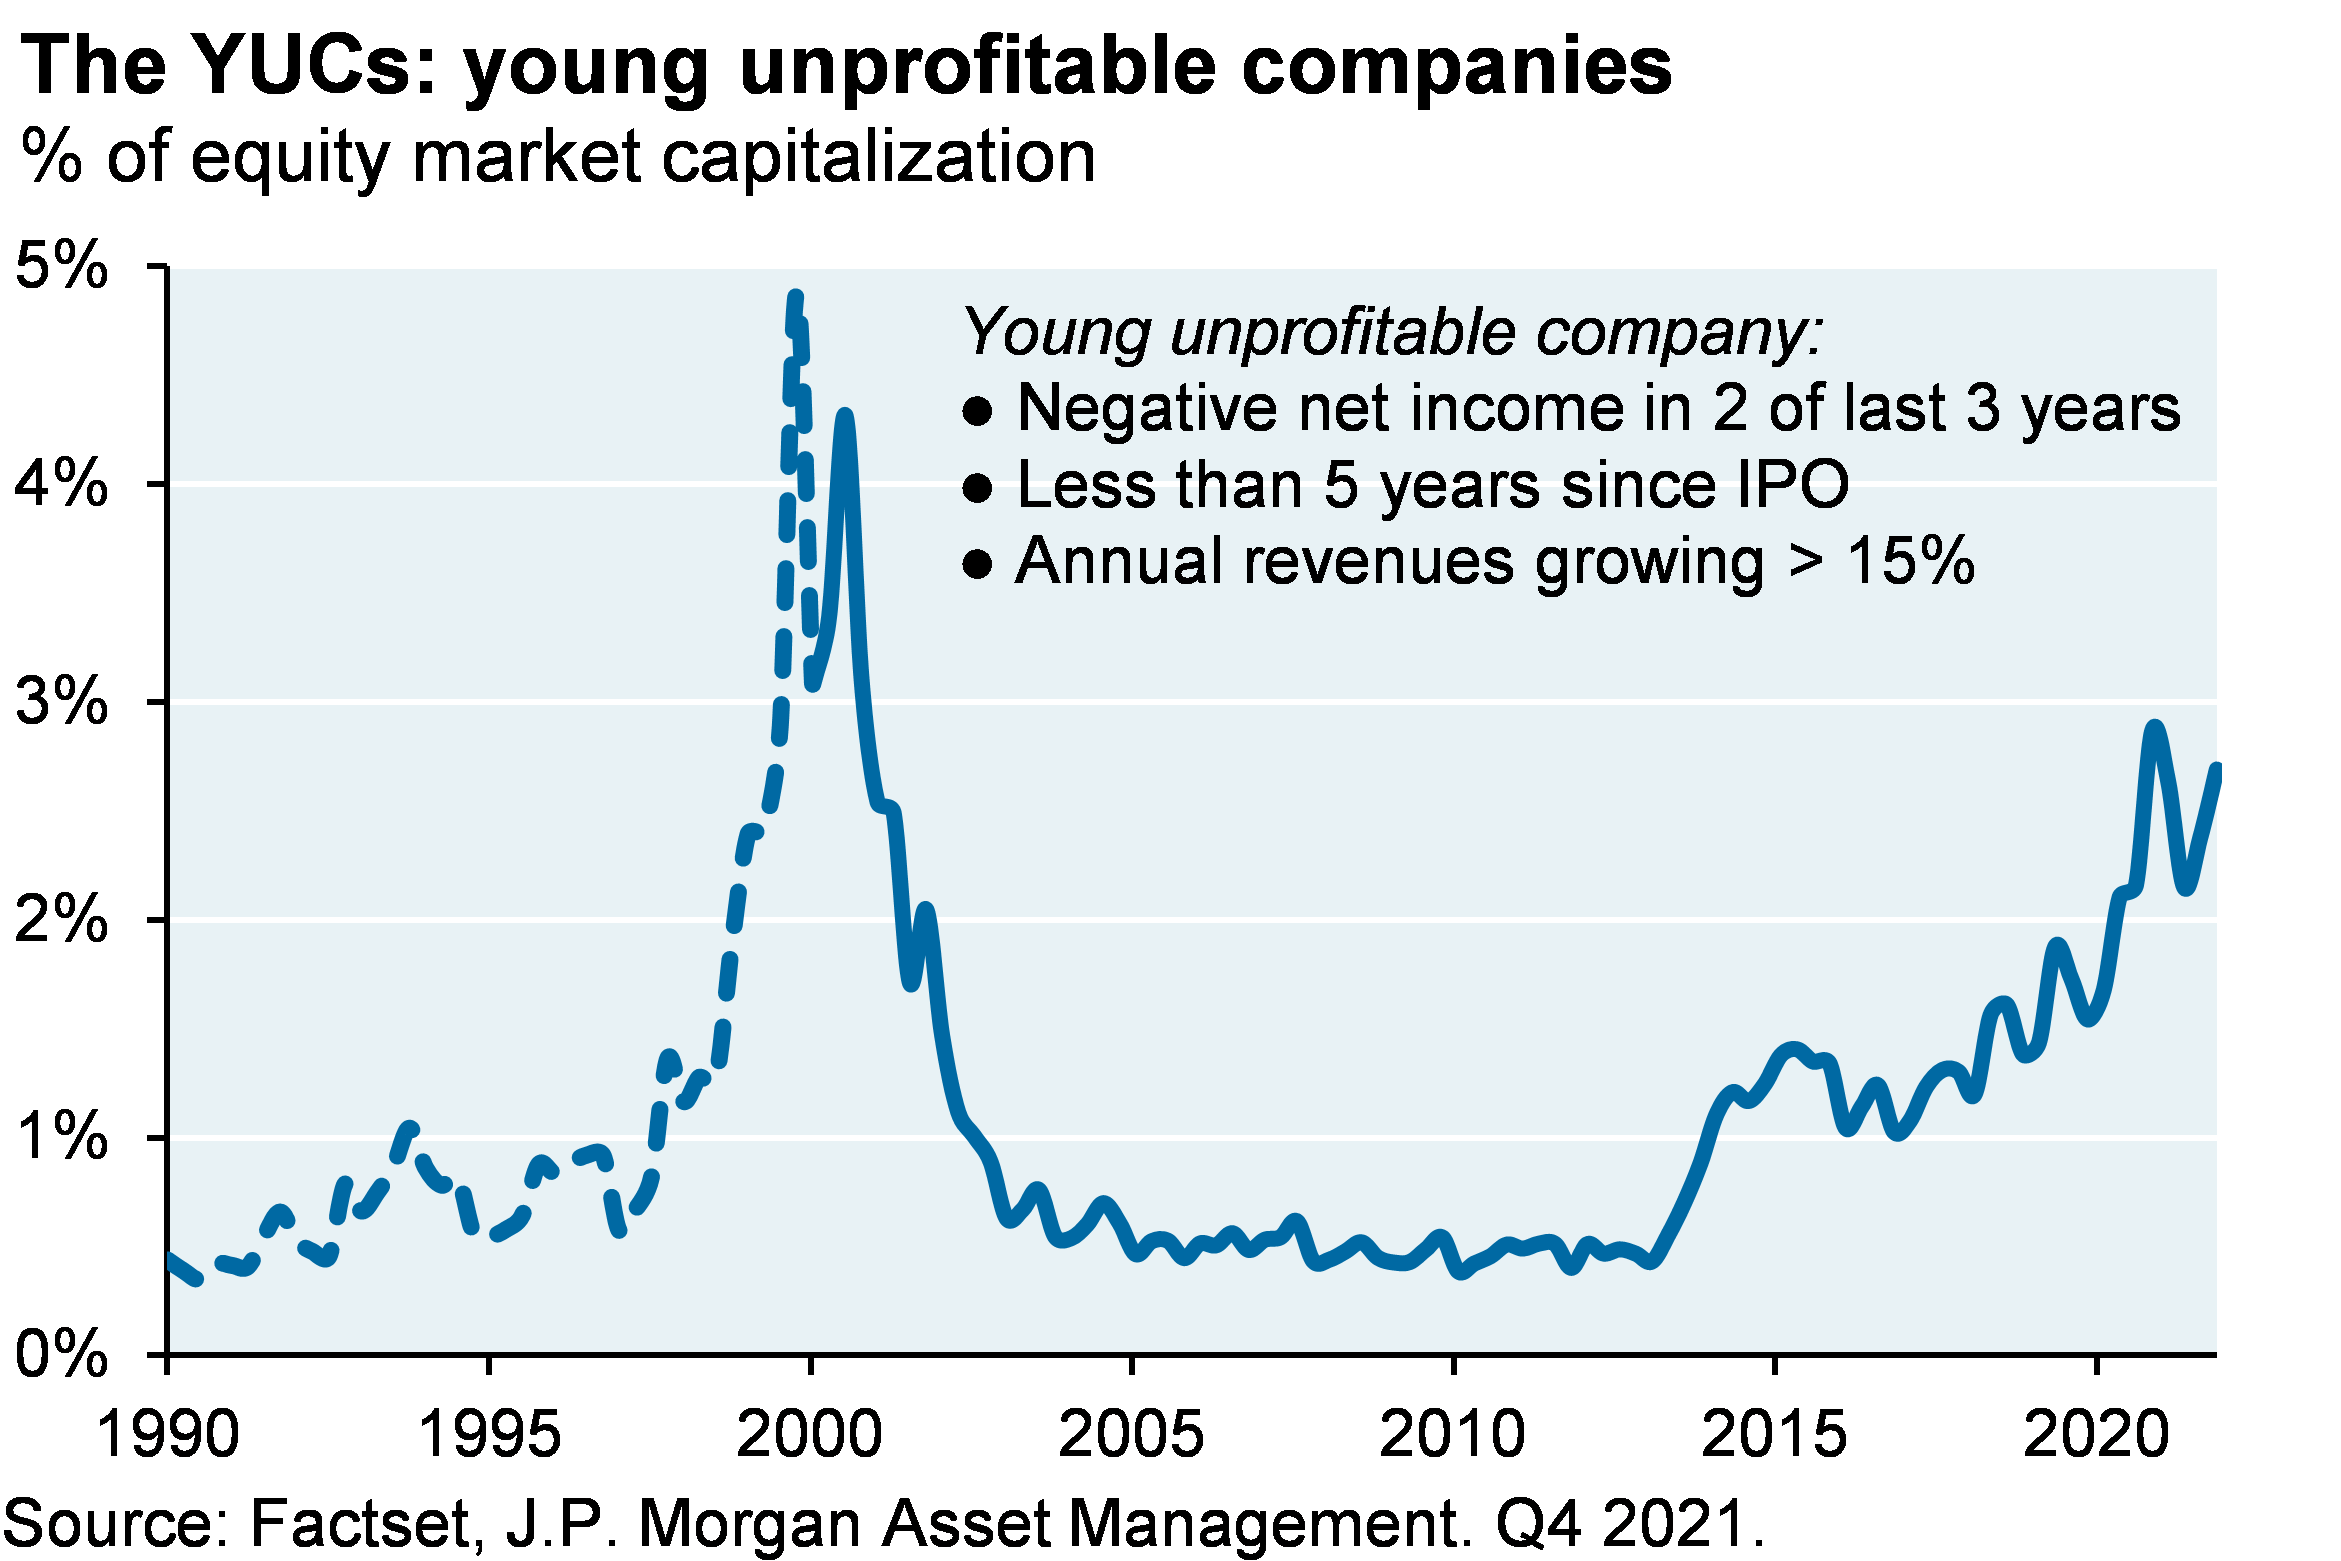 Line chart shows the market cap of young, unprofitable companies (YUCs) as a percent of total market cap. The YUC share has remained elevated at around 2.5% after starting to rise from below 1% in 2013.